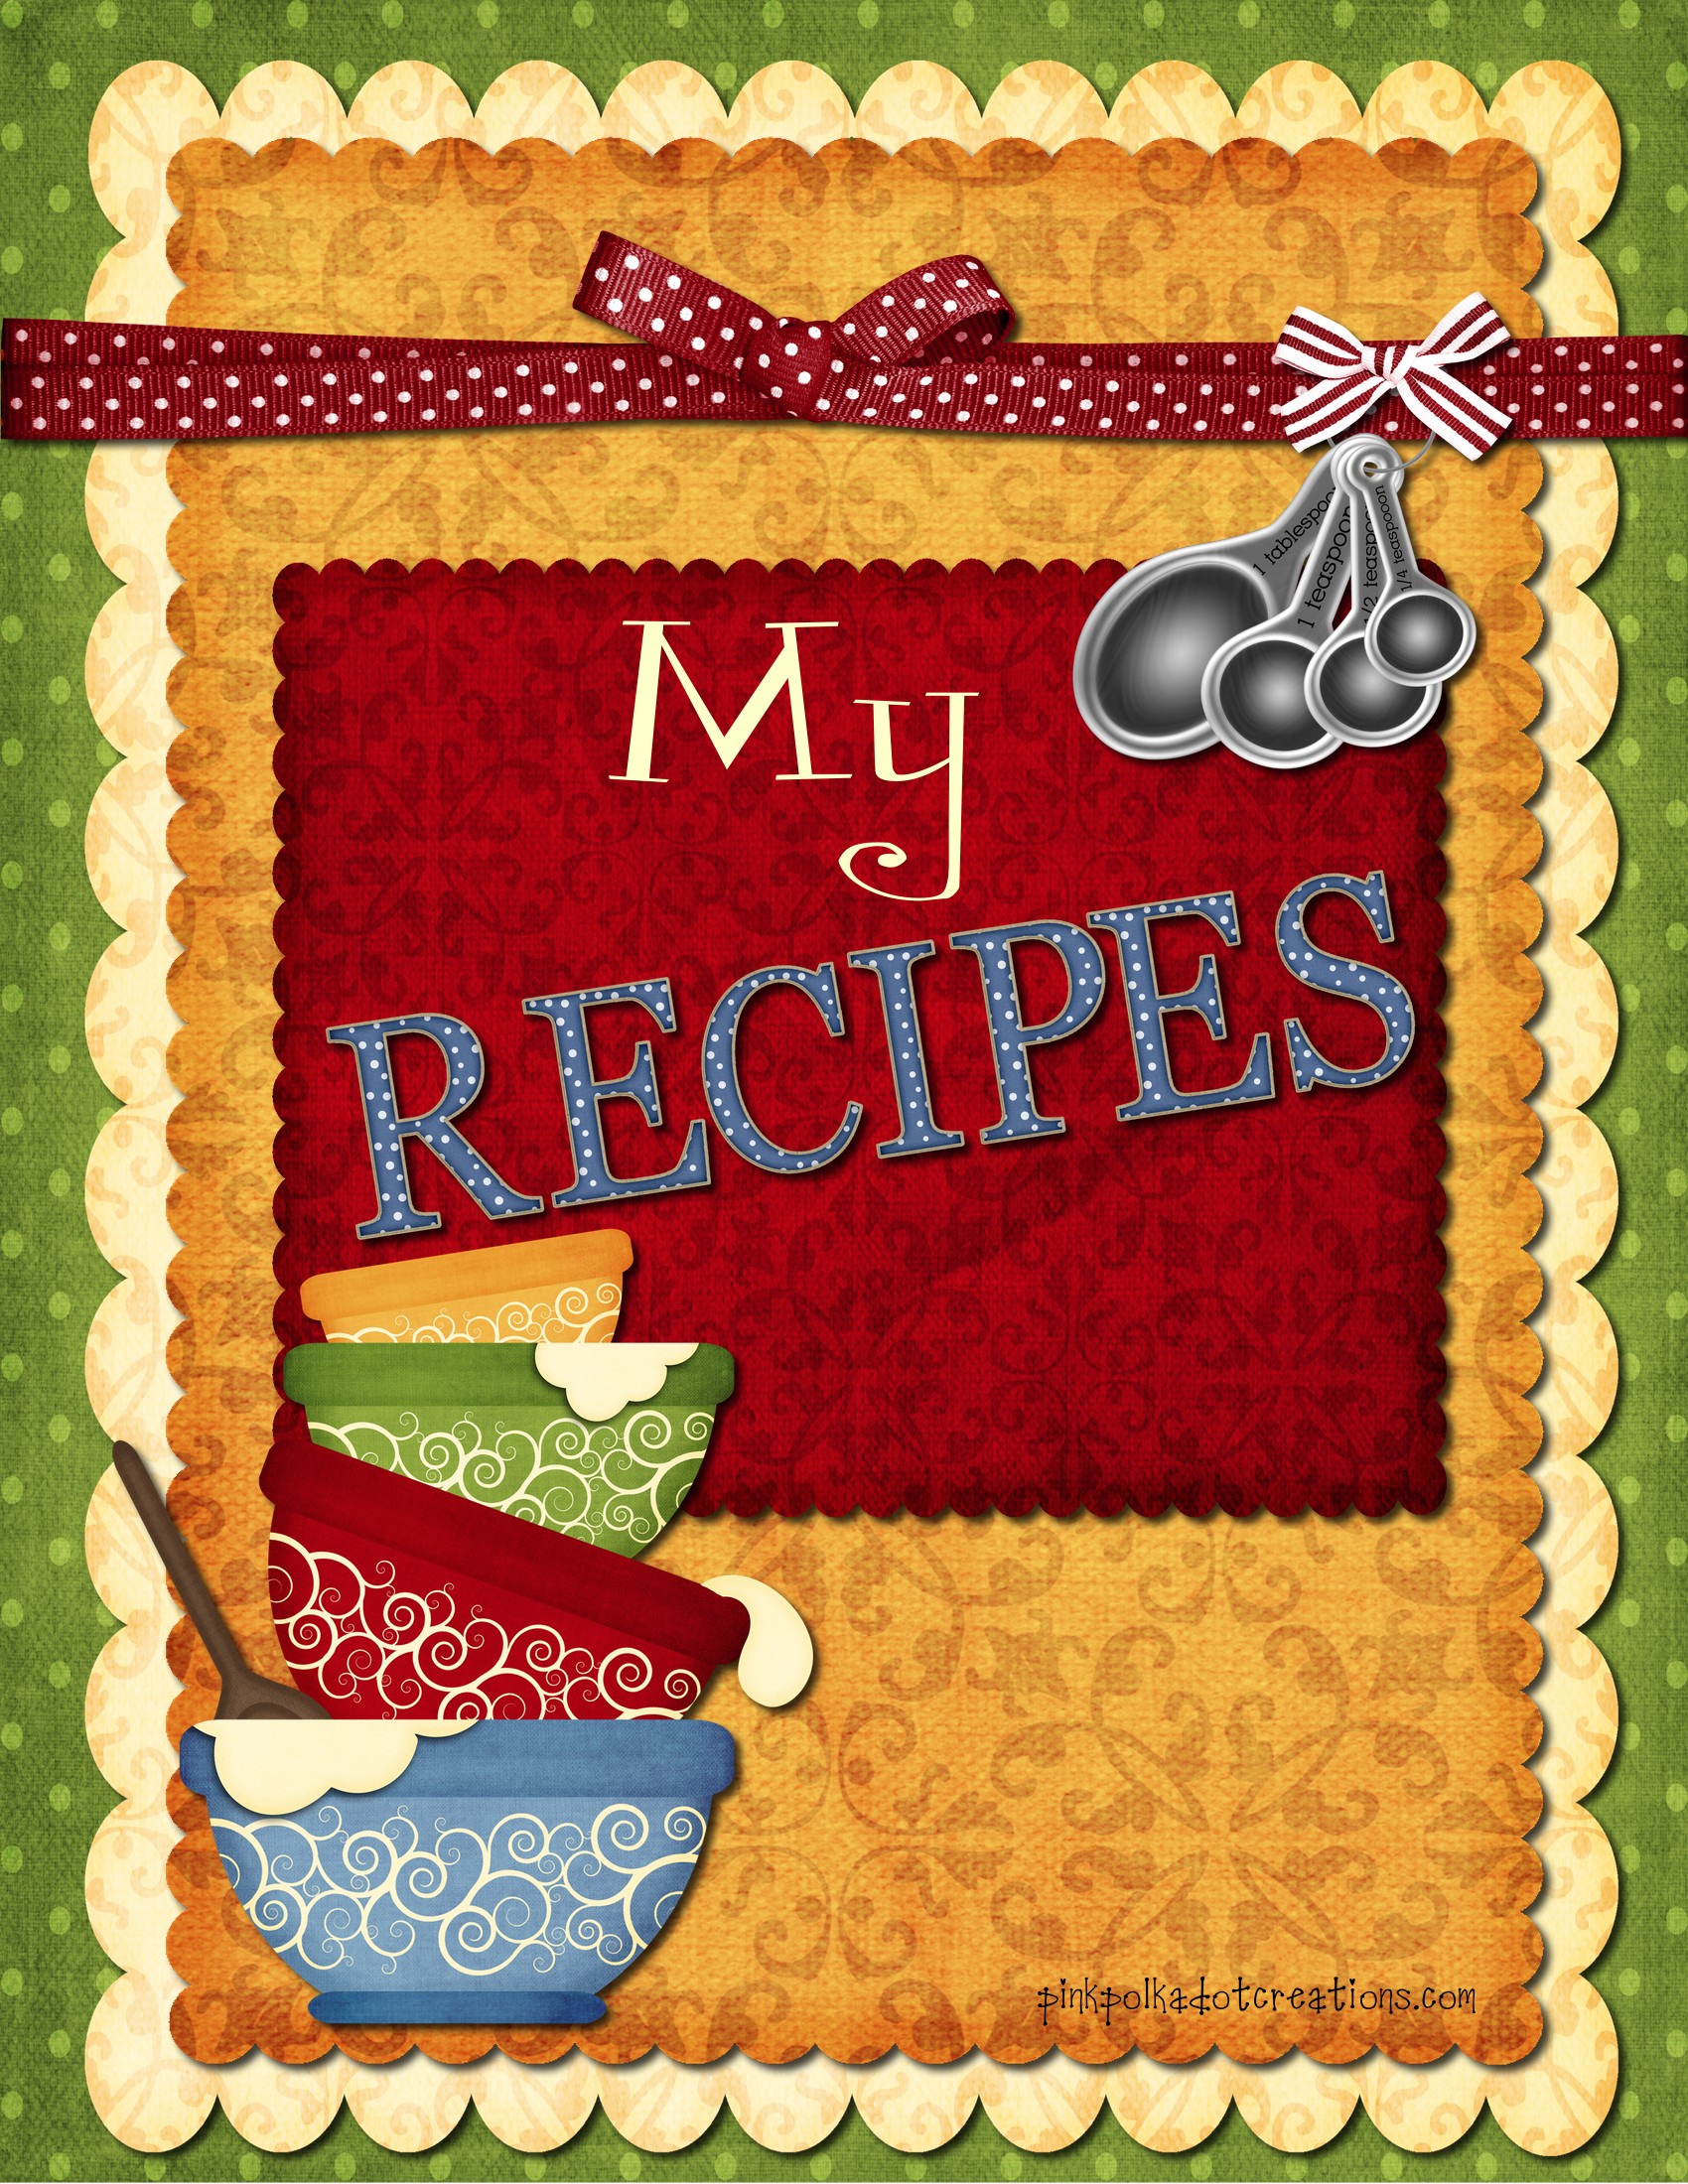 6 Best Images Of Recipe Cookbook Cover Printables Printable Recipe Binder Cover Templates 